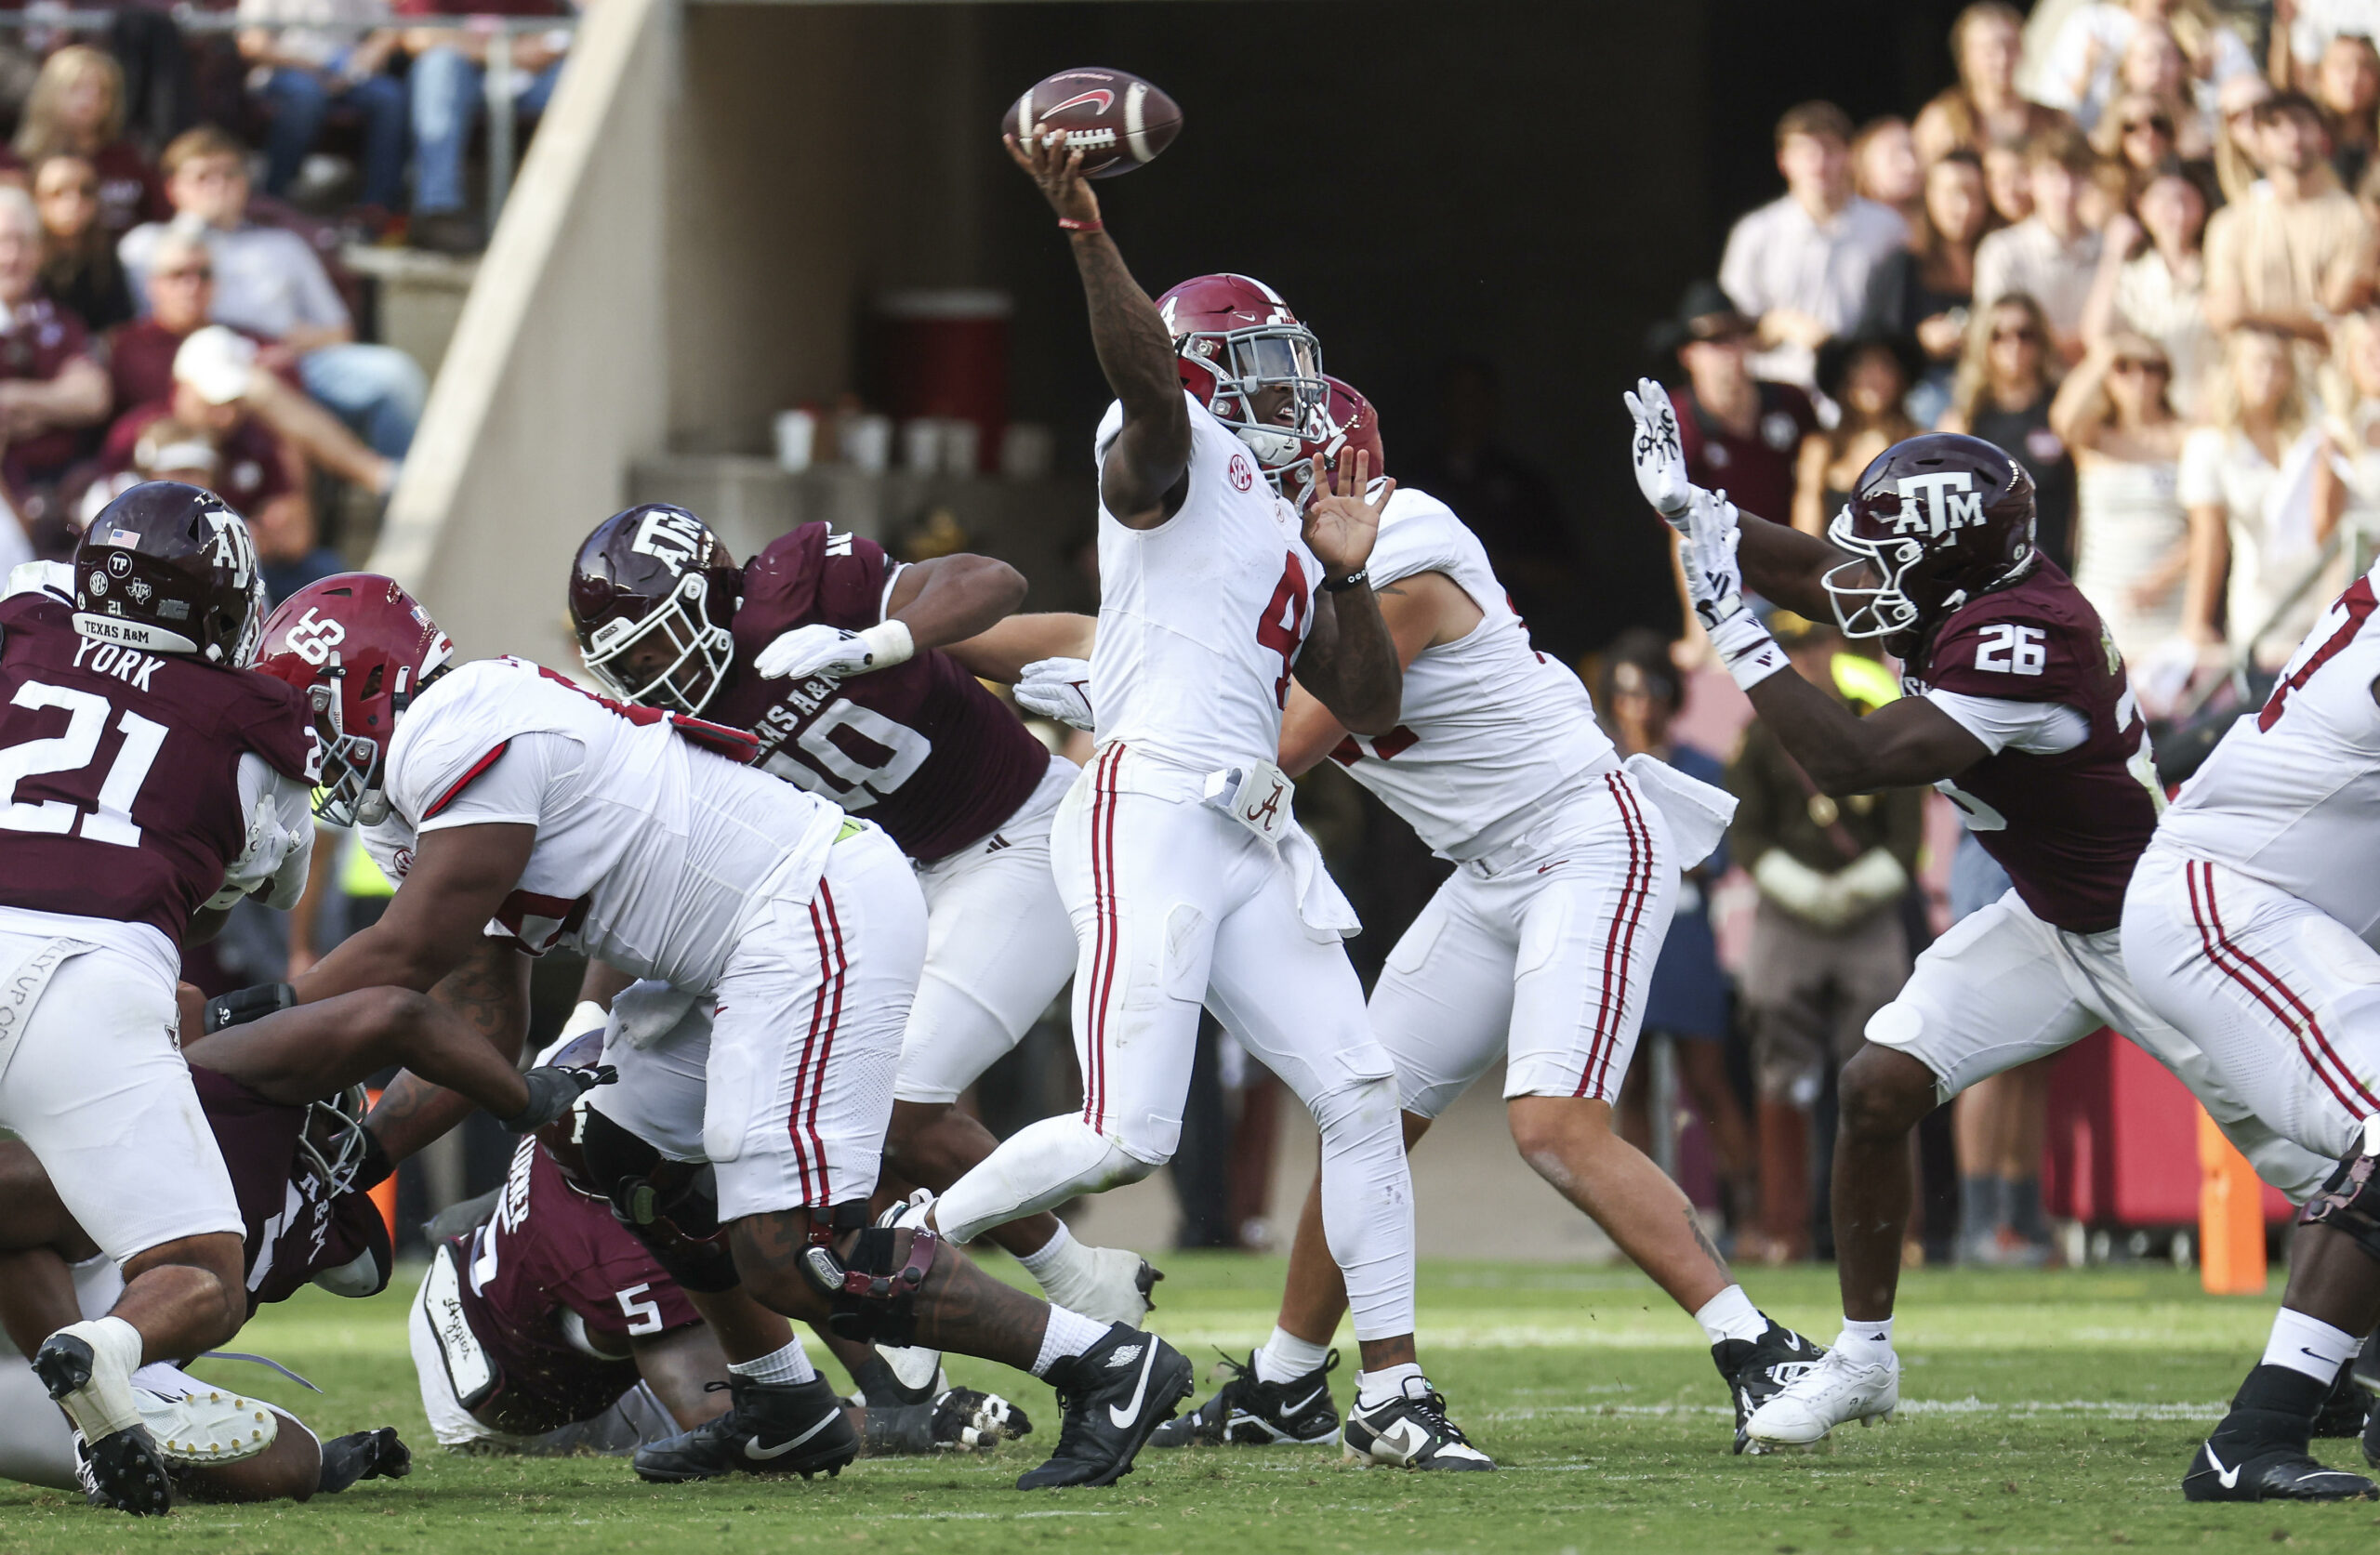 Report Card: Grading Alabama’s 26-20 win over Texas A&M